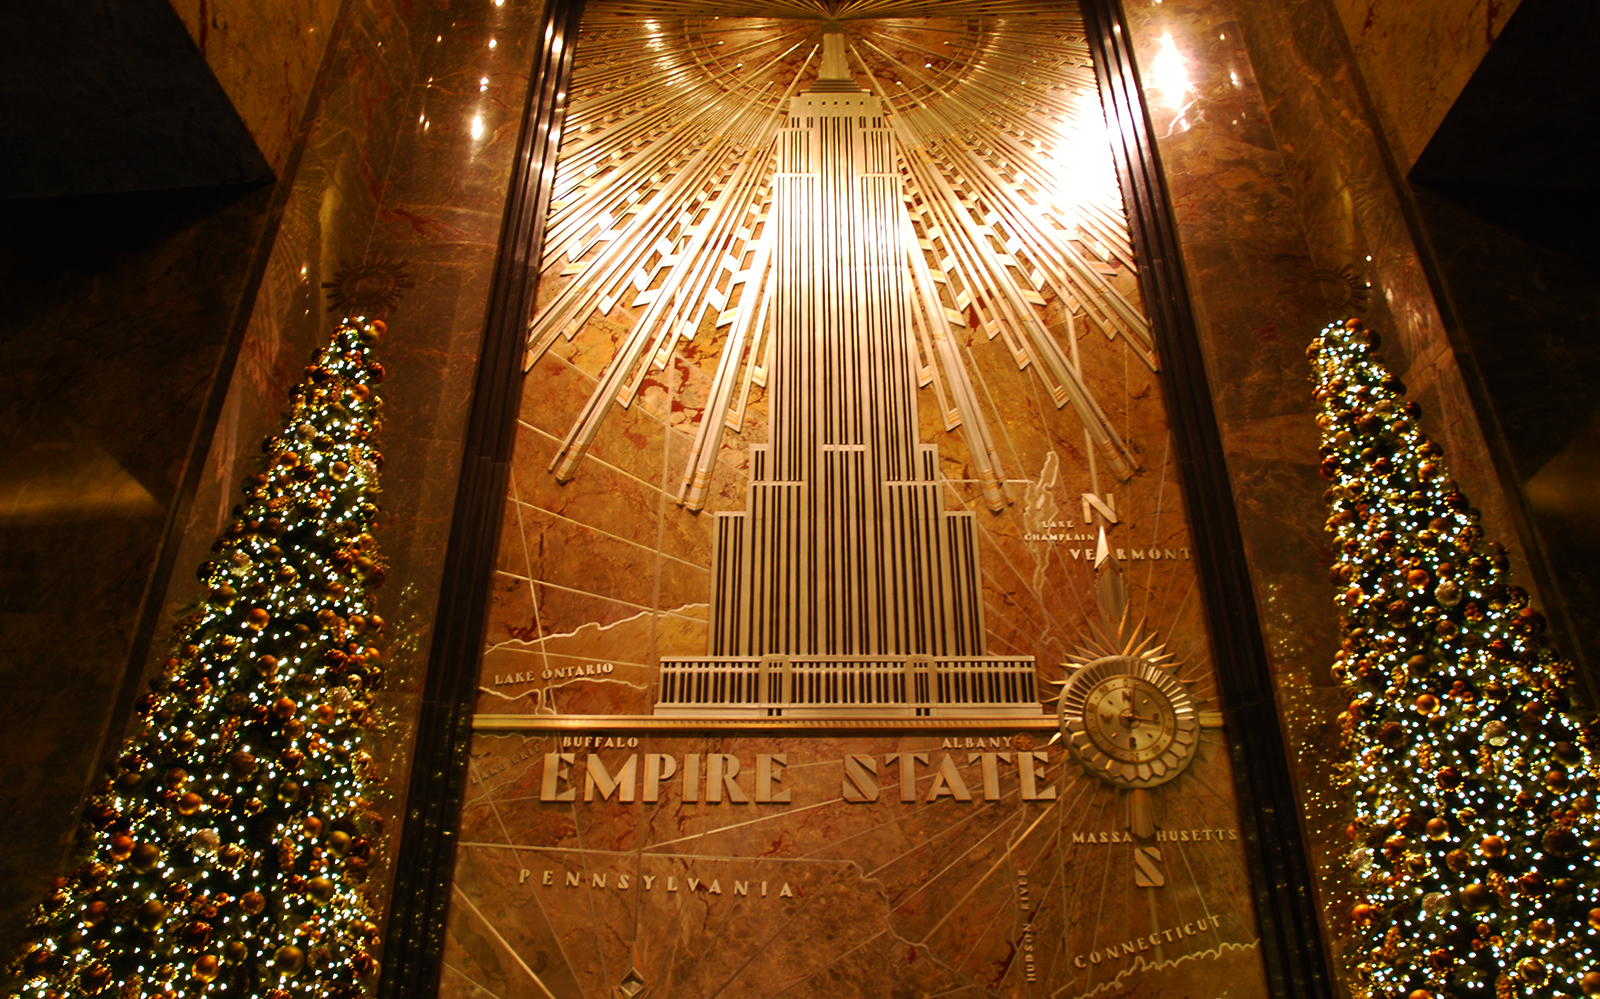 Empire state building history